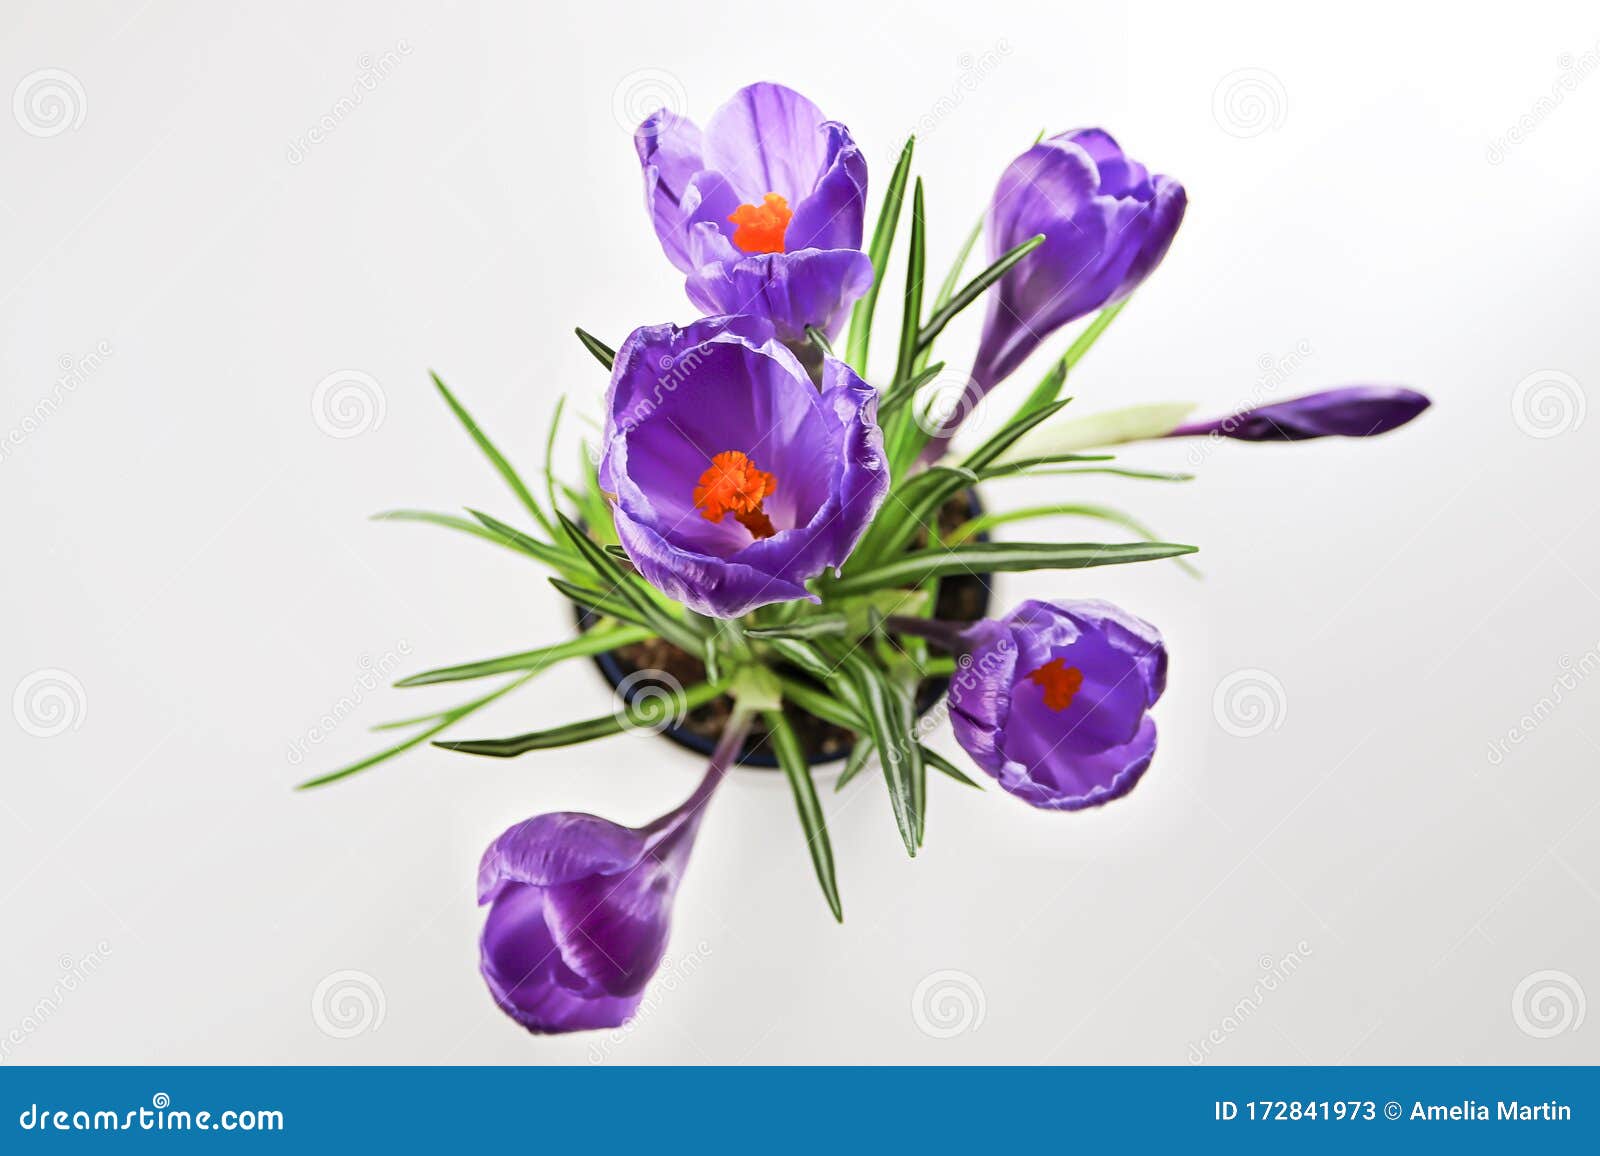 Isolated View of Purple Crocus Flowers Looking Down Stock Image - Image ...